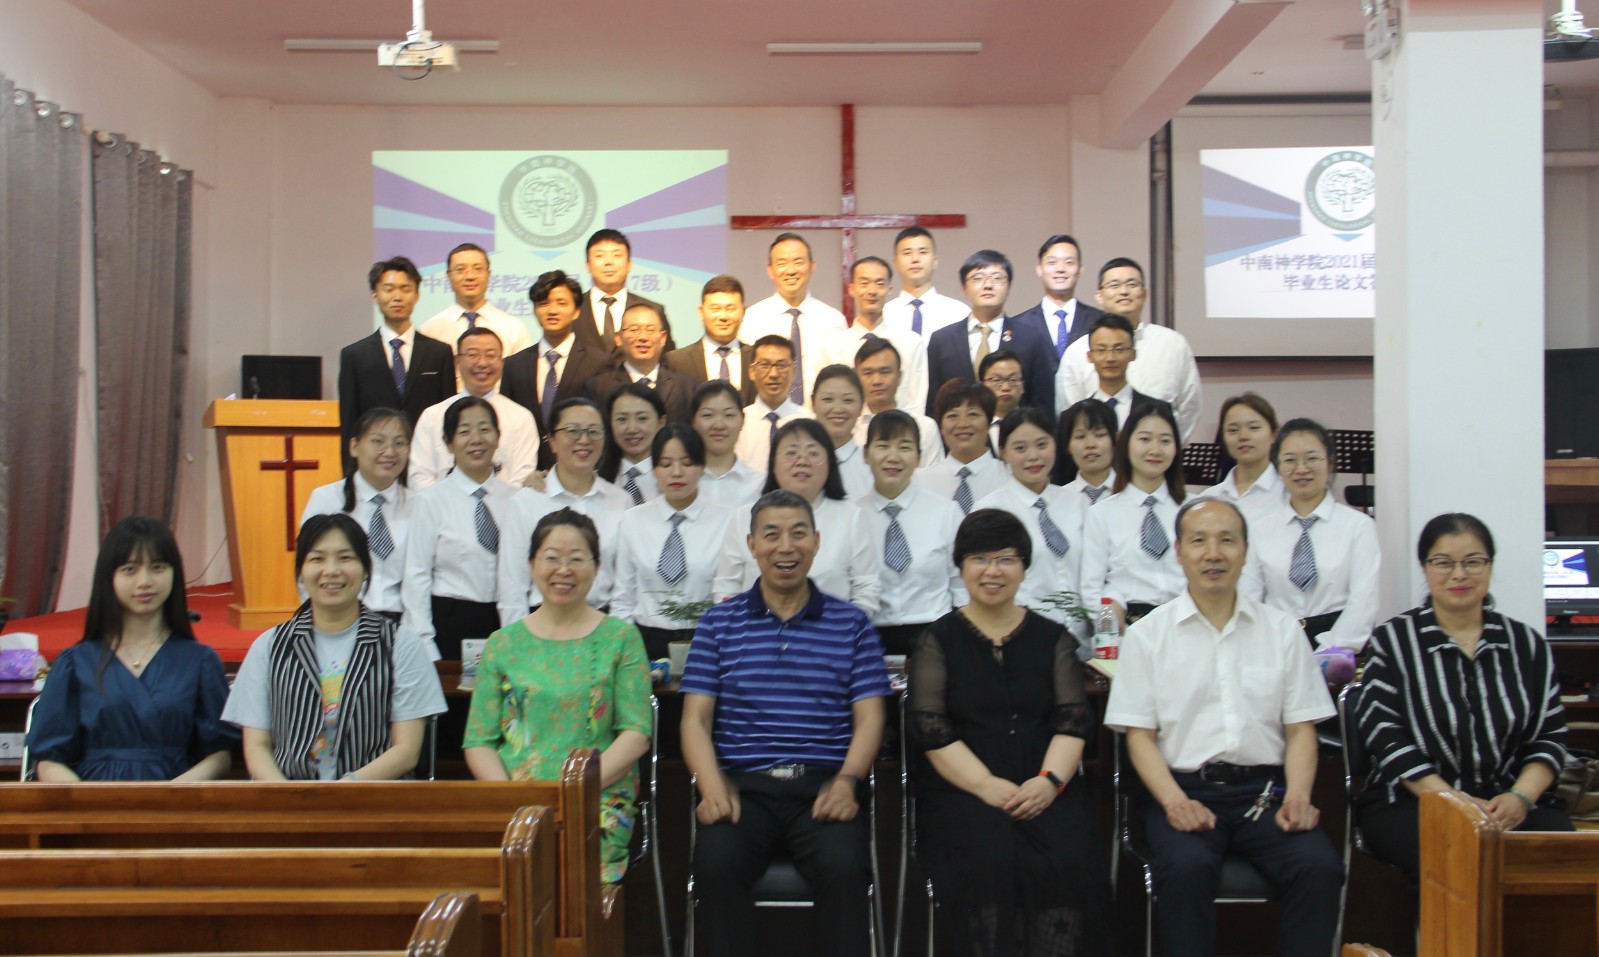 Graduates of Zhongnan Theological Seminary took a group picture with faculty on June 16, 2021.